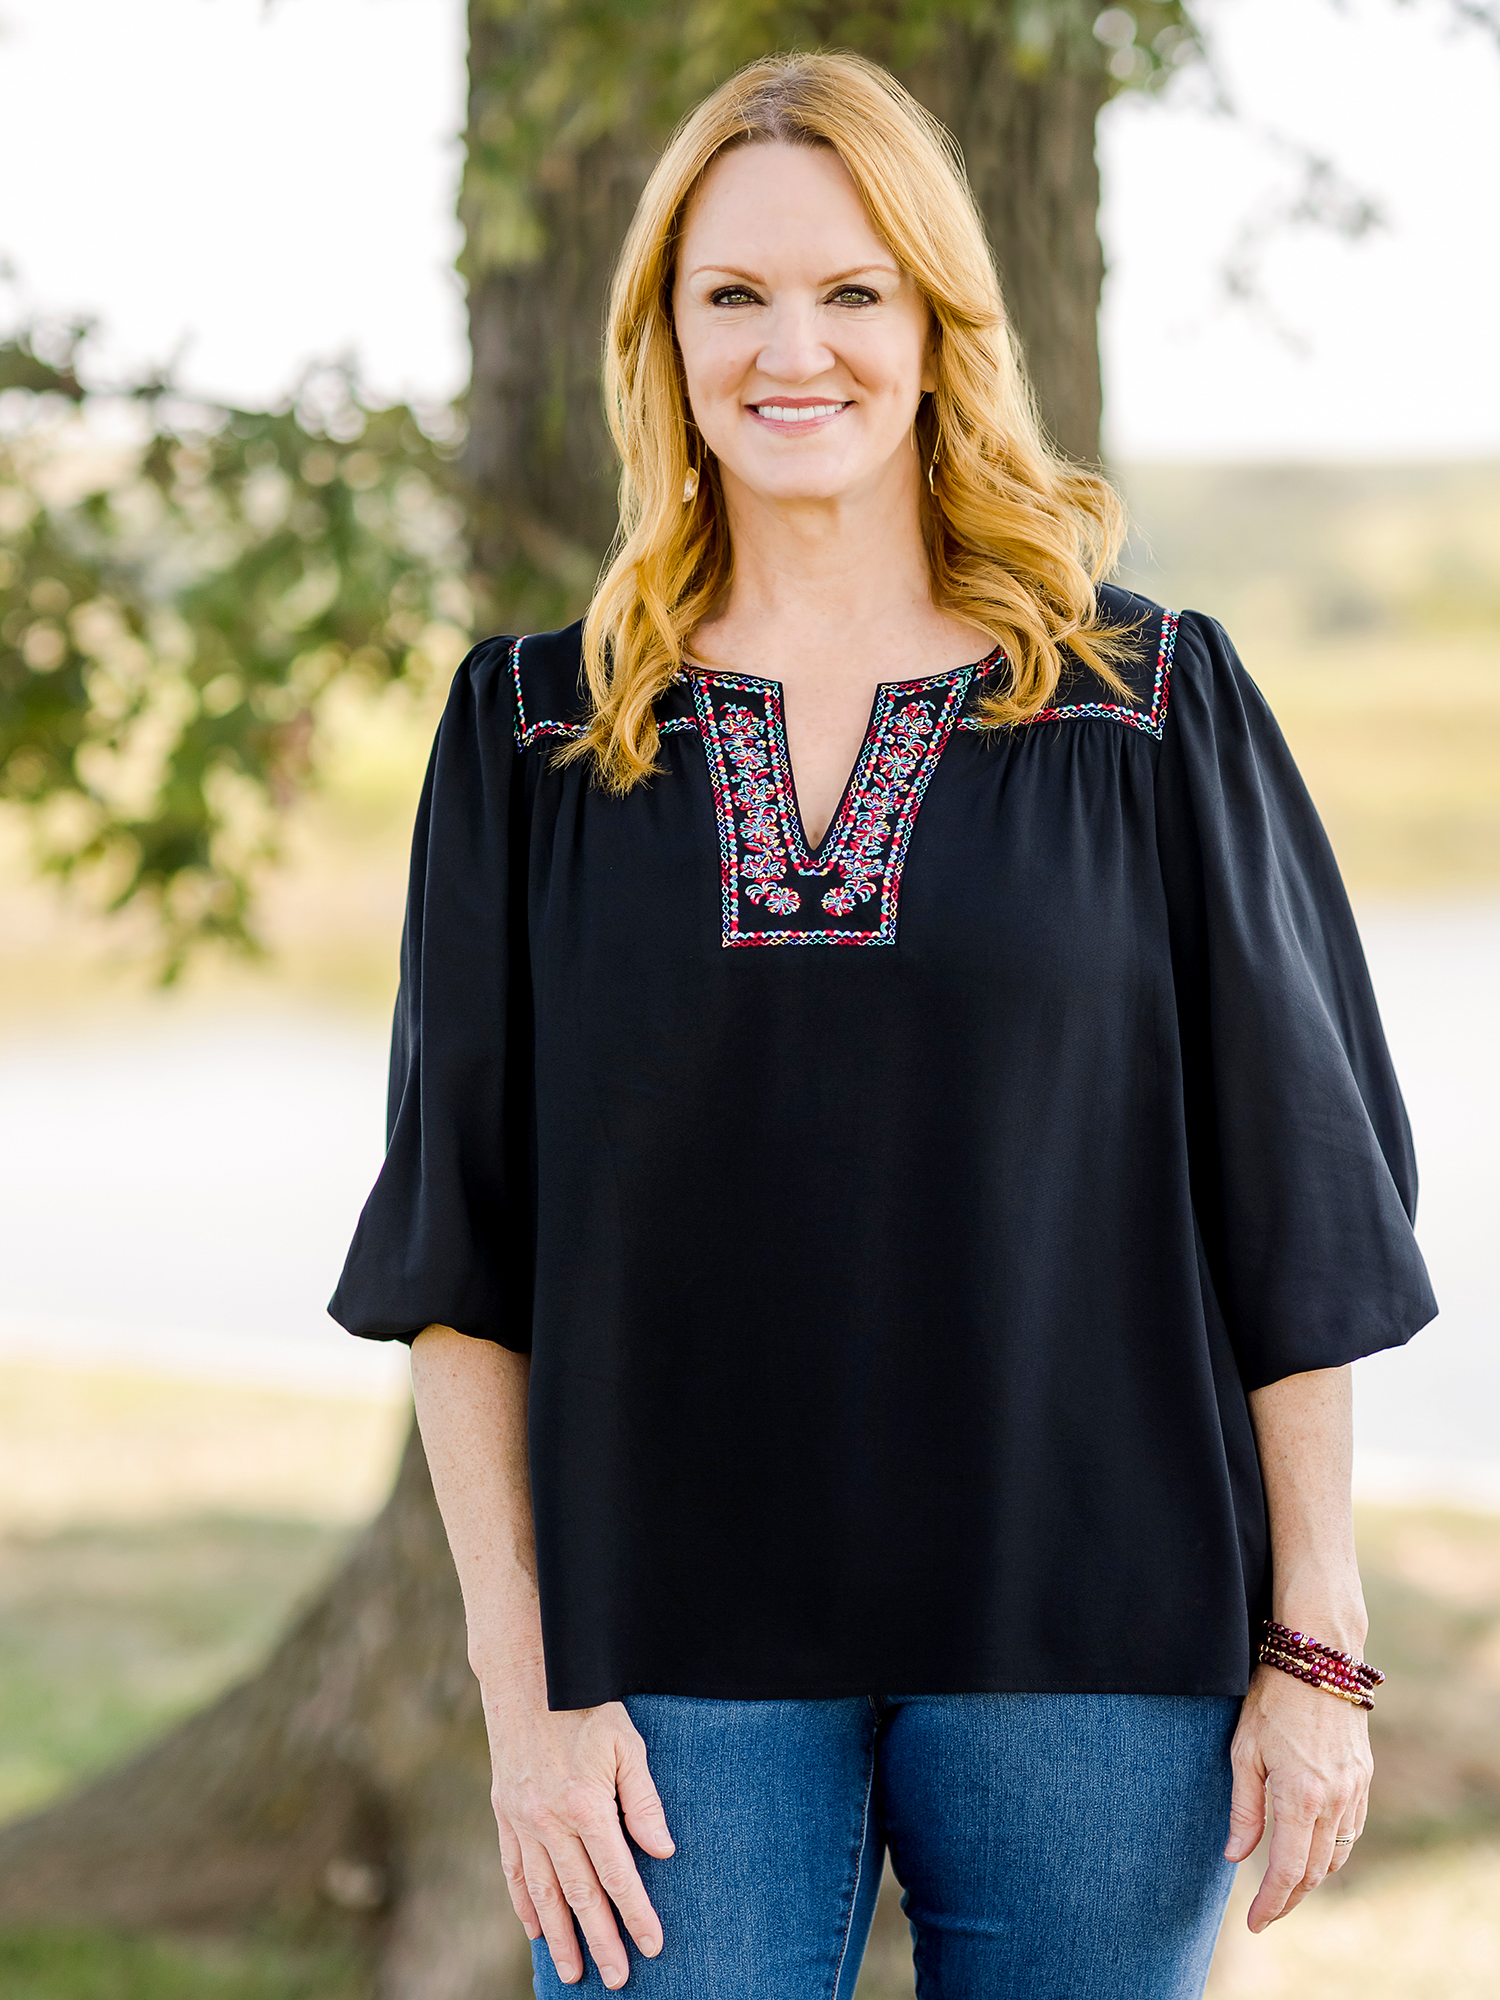 Ree Drummond, the Pioneer Woman, on Casseroles and Cooking for an